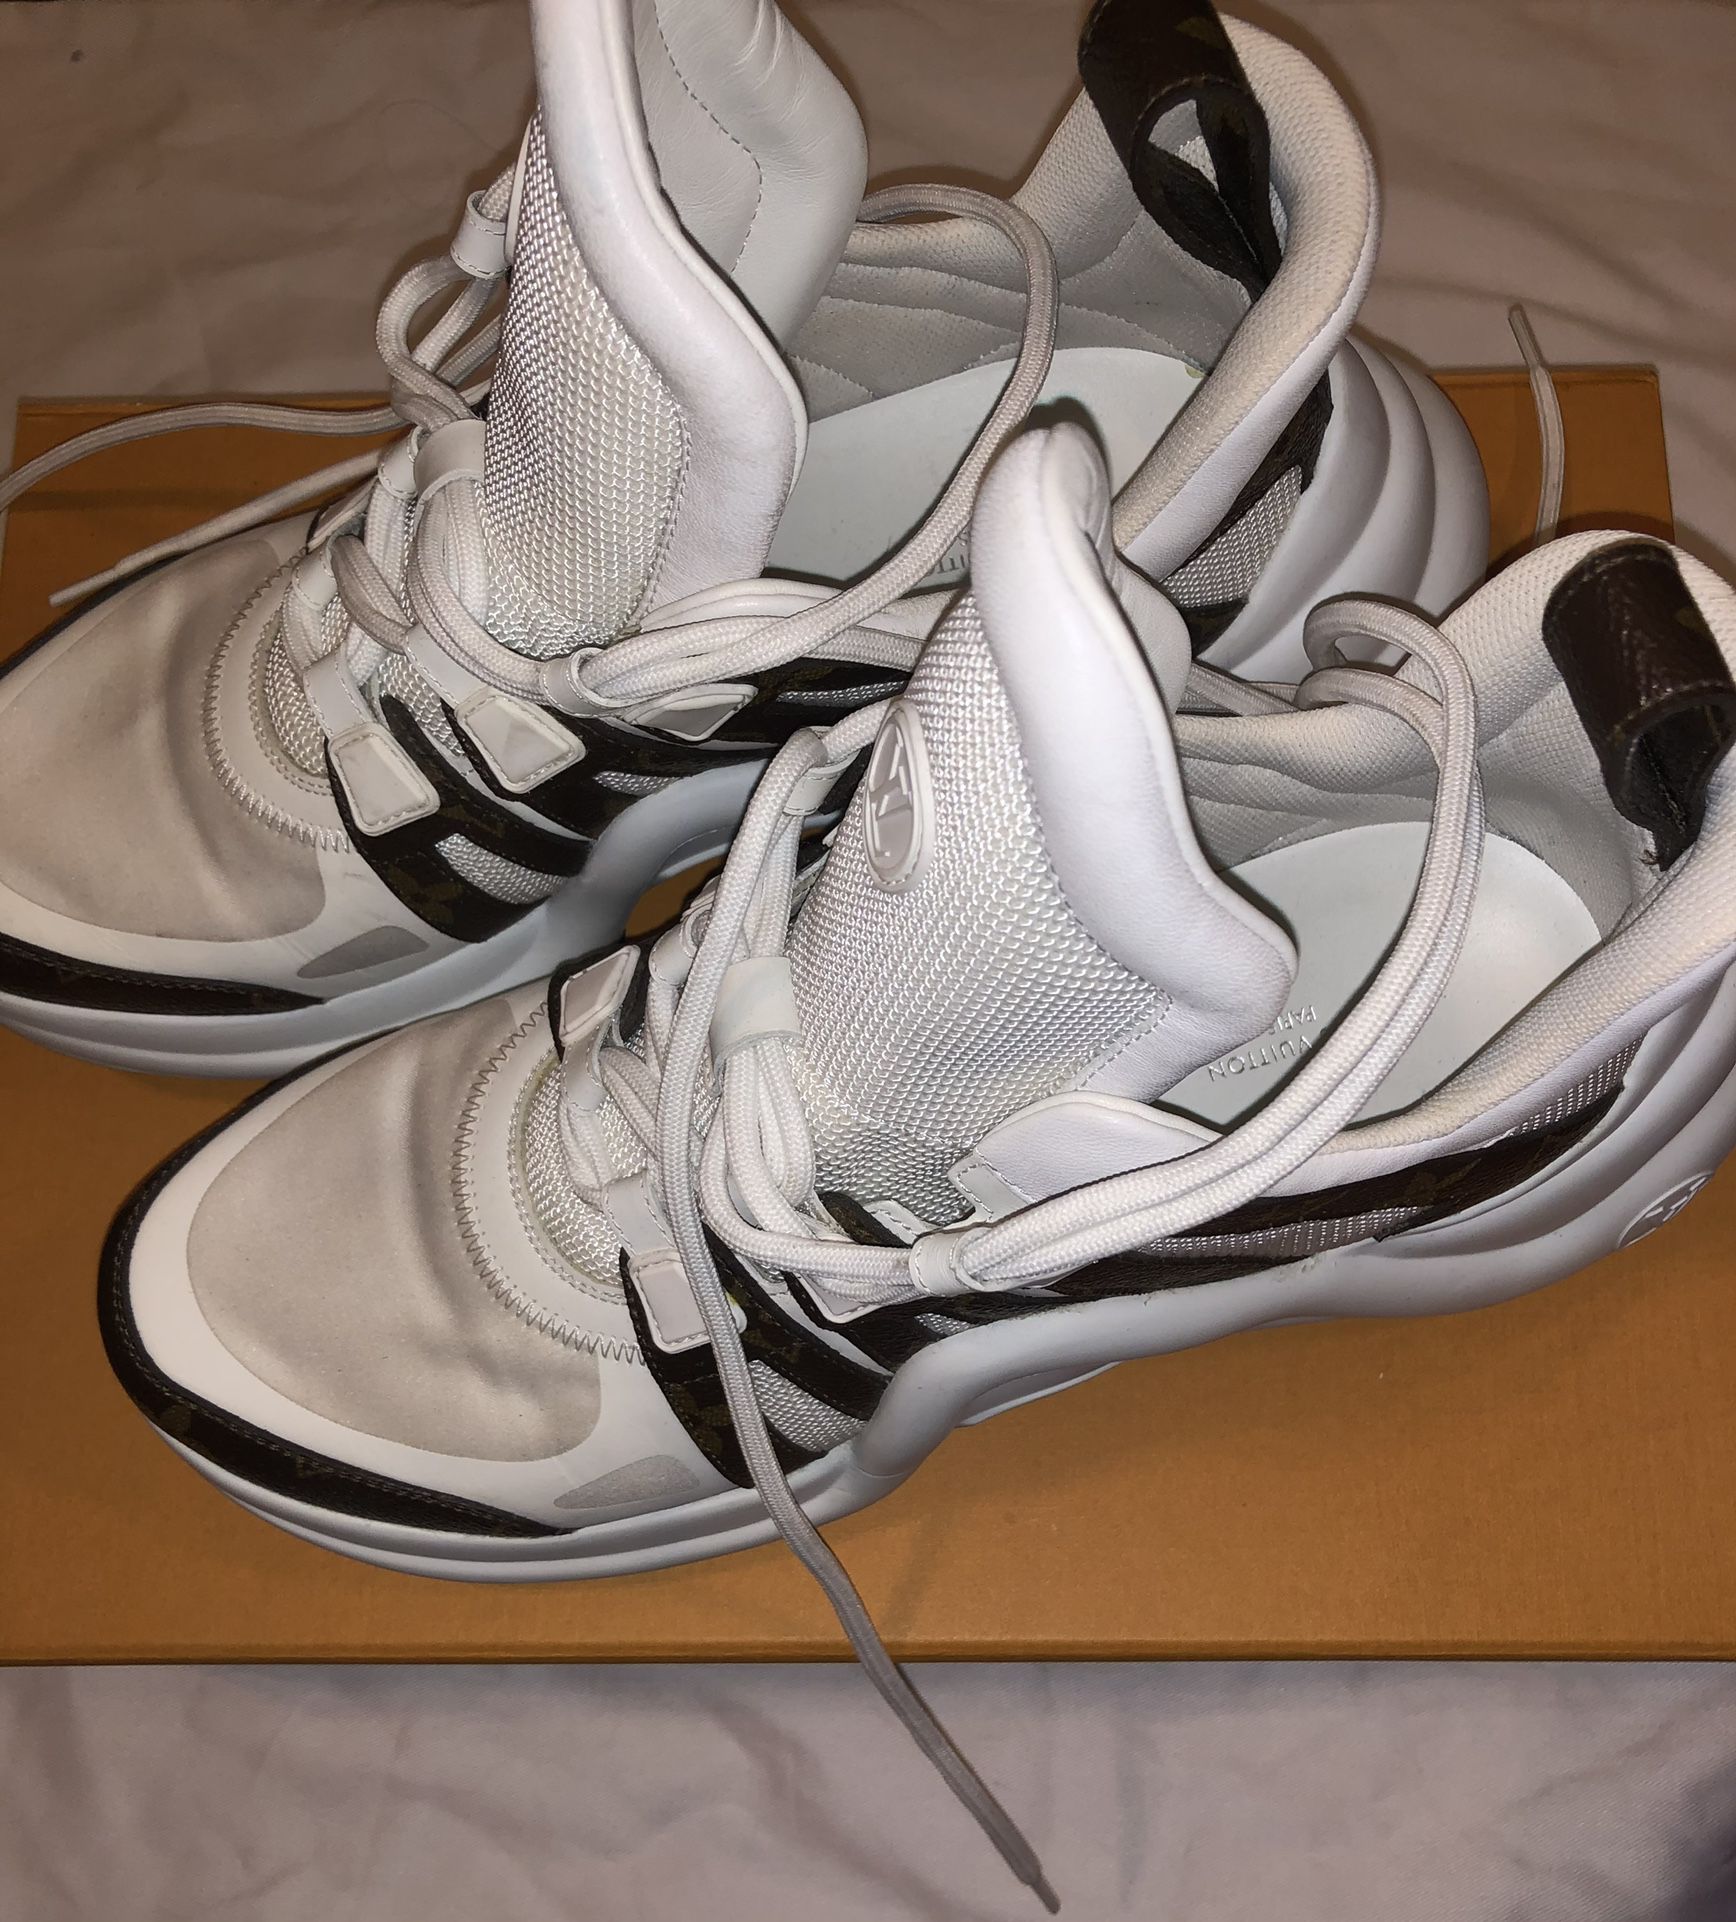 Louis Vuitton Arch light Sneakers for Sale in Moreno Valley, CA - OfferUp